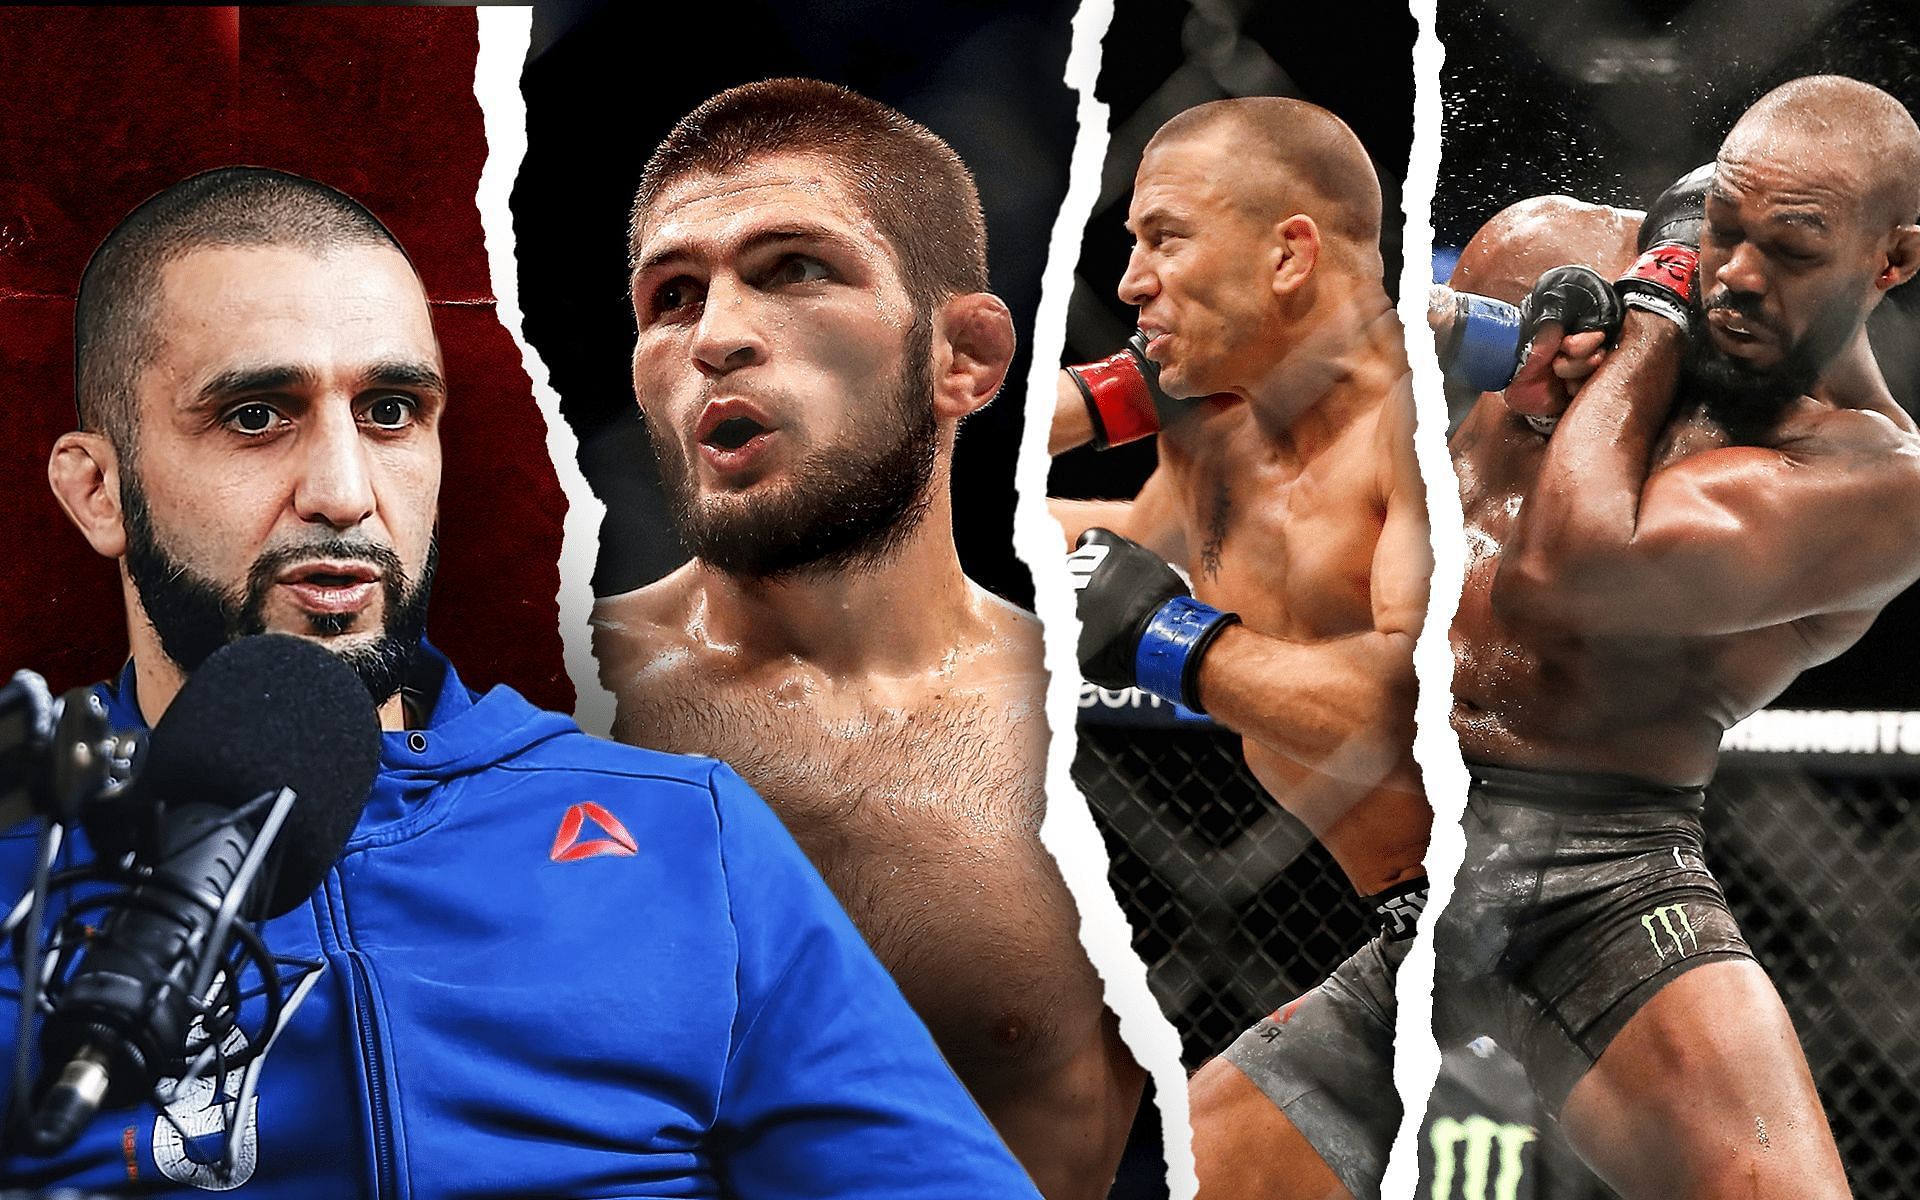 Firas Zahabi claims even the greatest fighters have suffered setbacks in their careers [Firas Zahabi Image courtesy: 5Pillars on YouTube; Other Images: Getty]